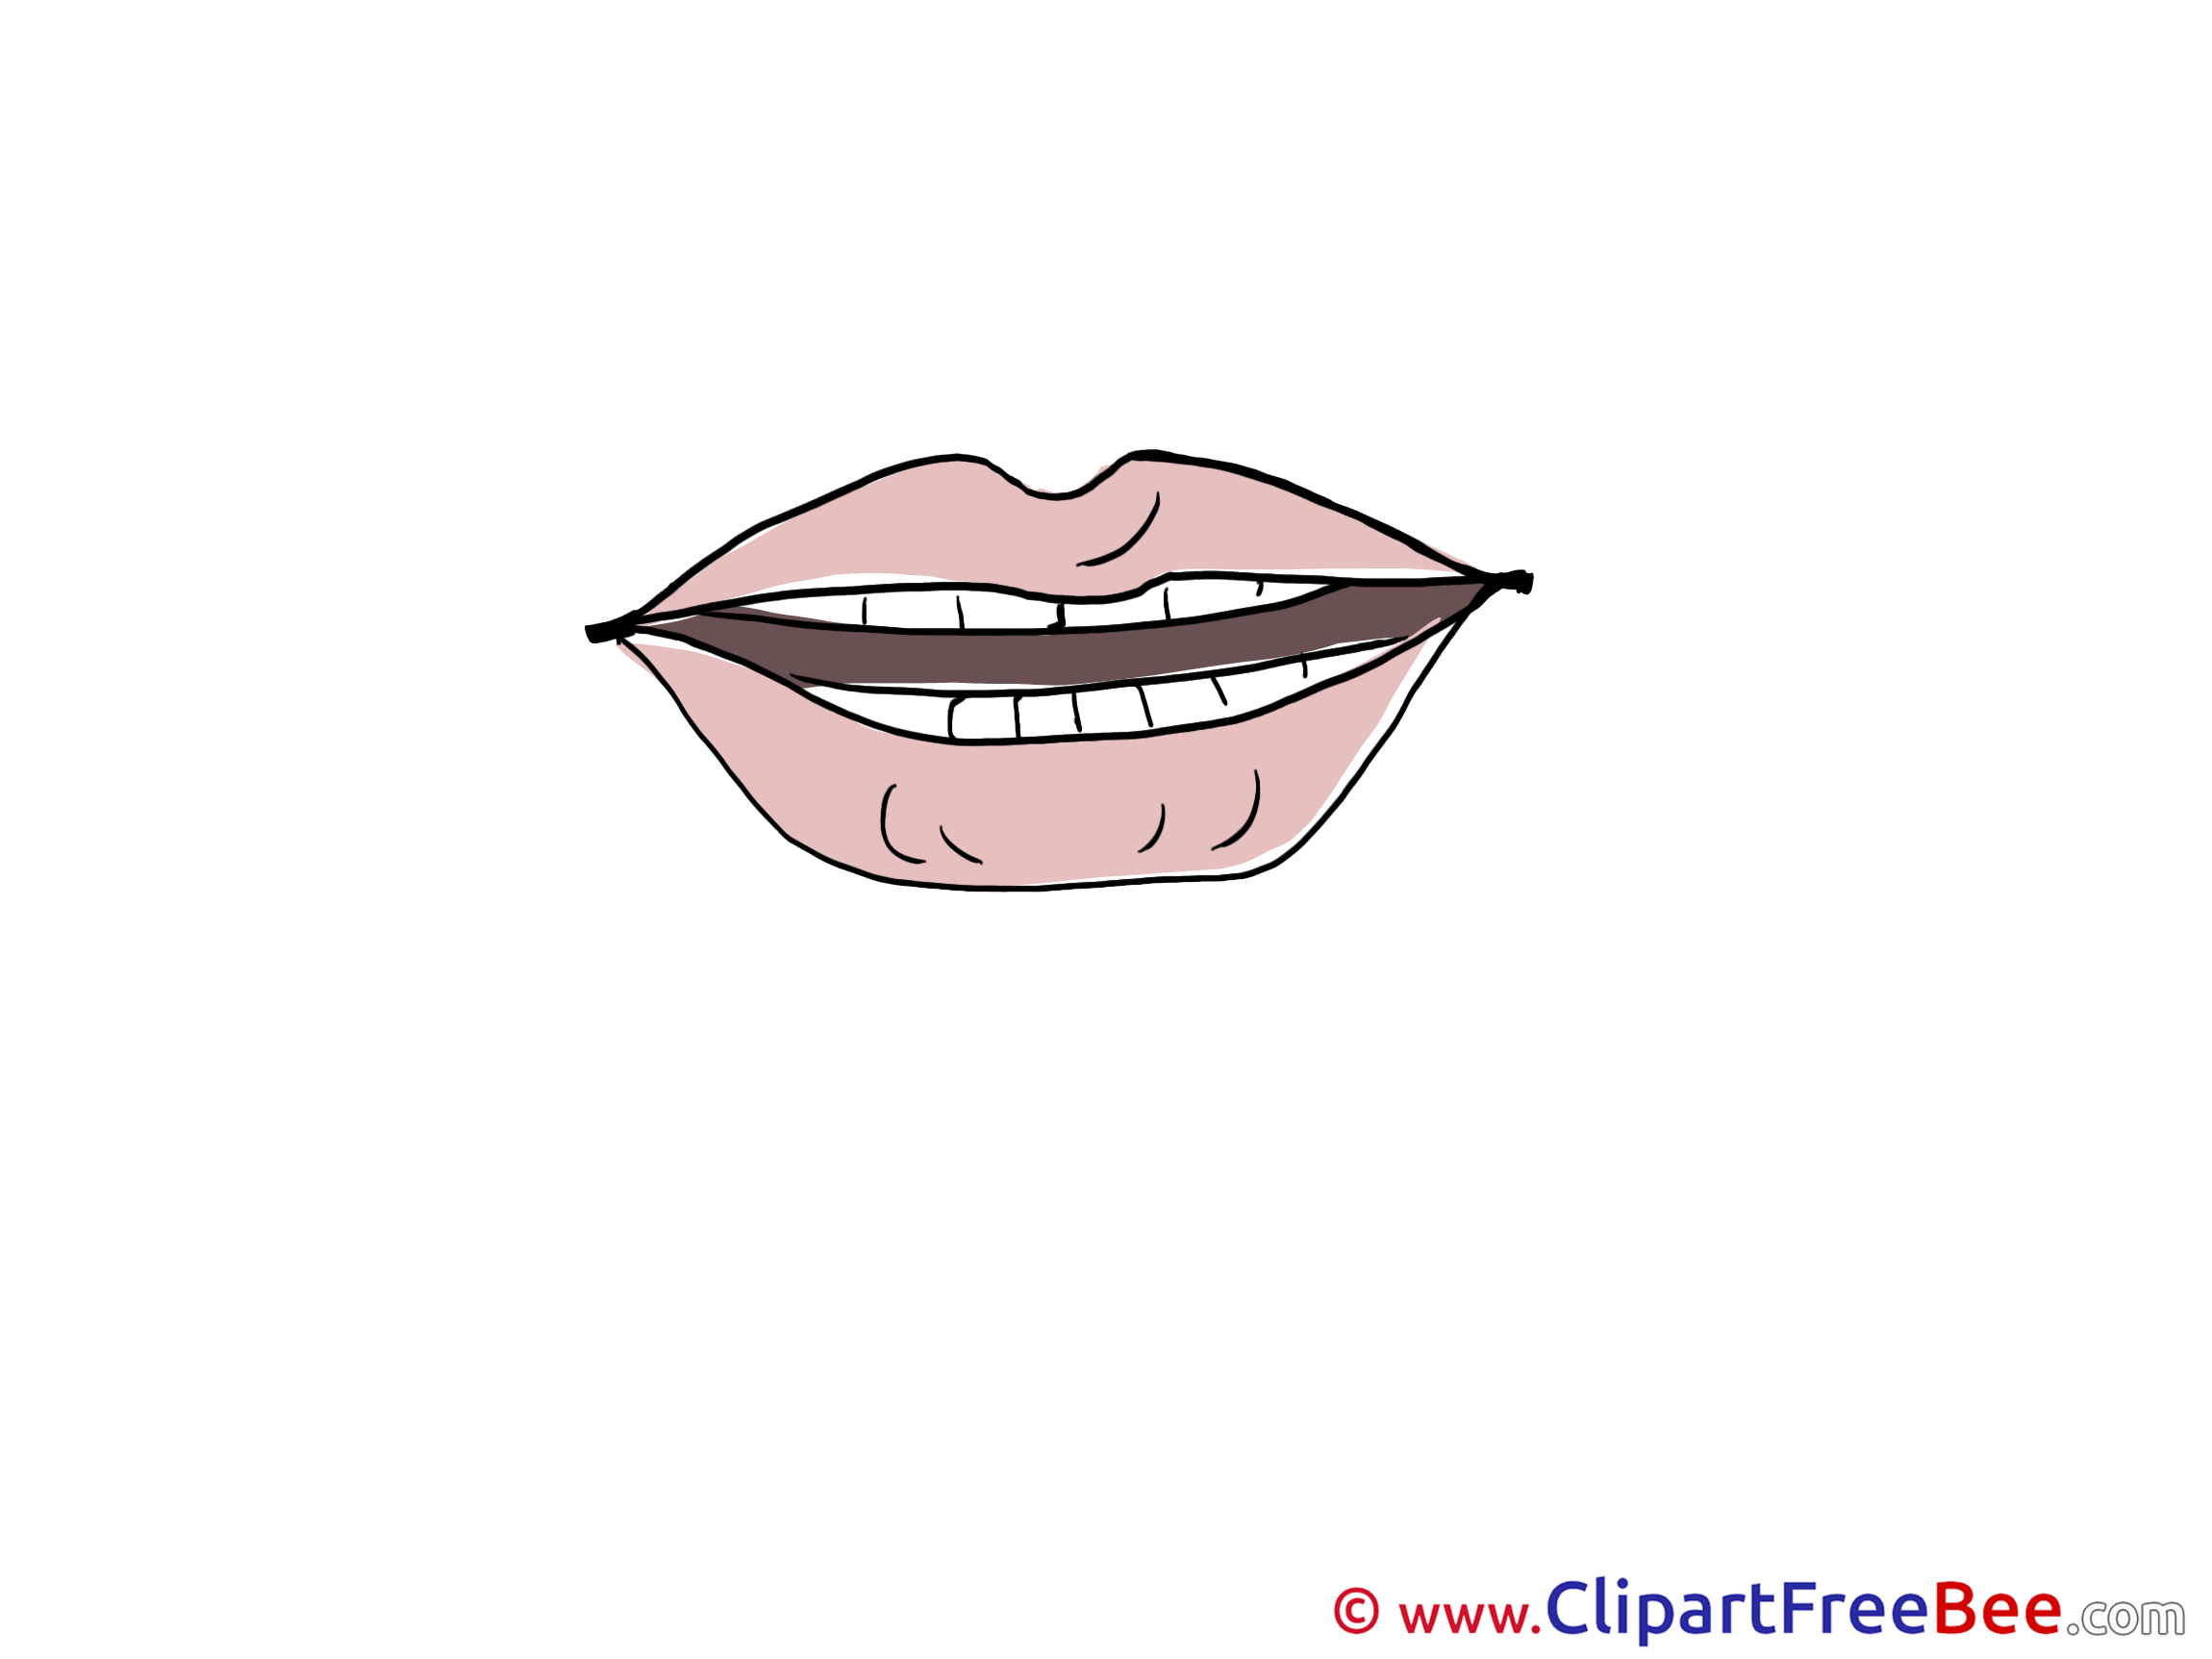 Mouth Images download free Cliparts